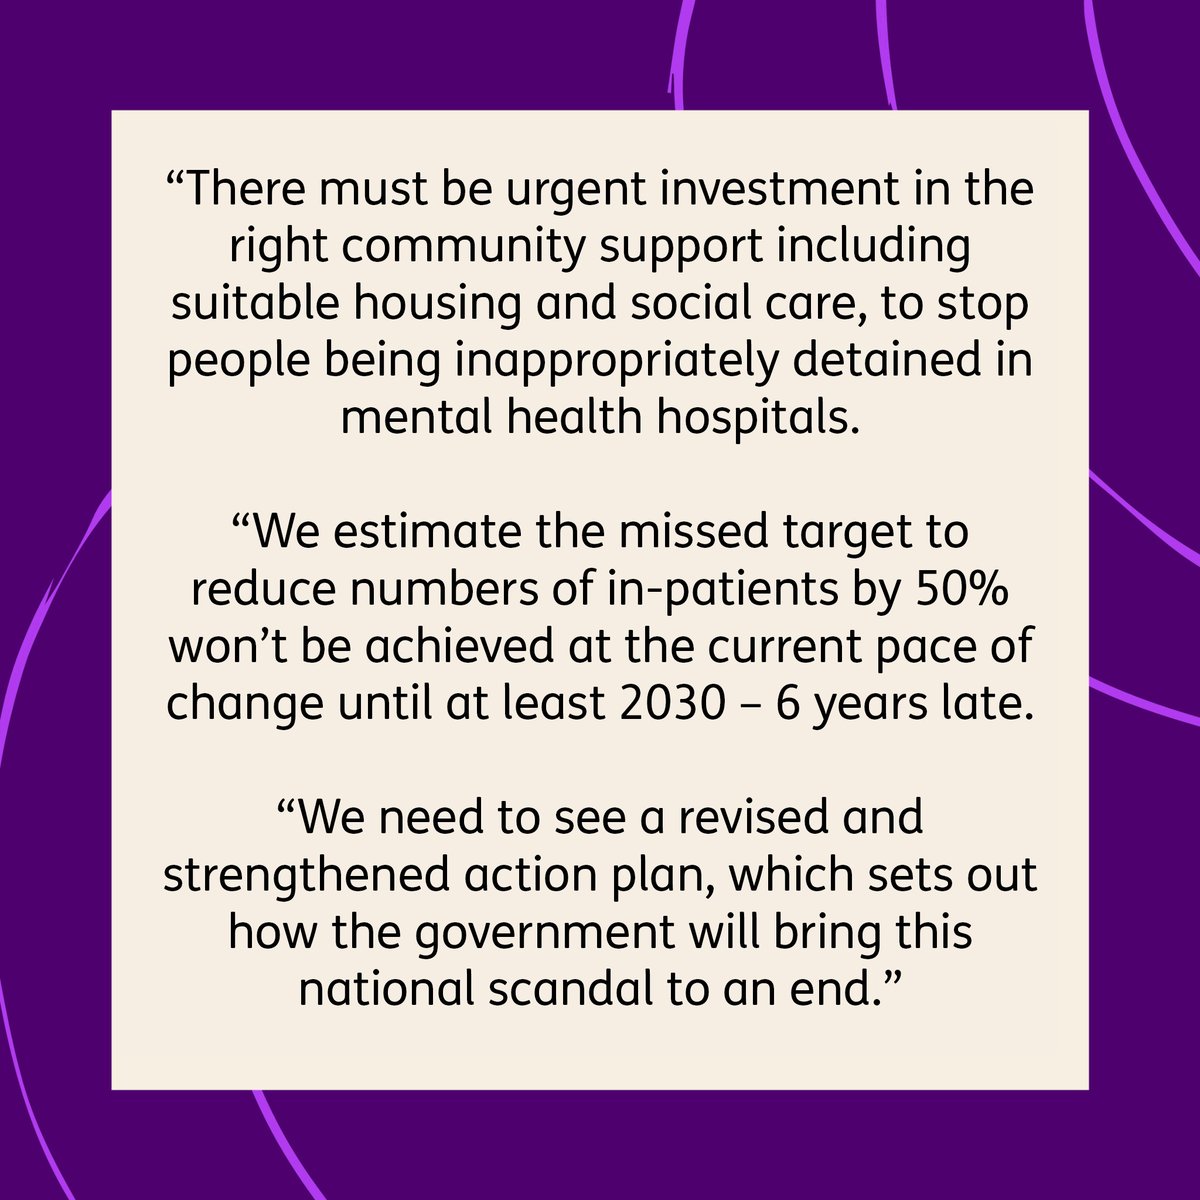 The data released by NHS England today showed the government have missed their own target for reducing the number of people with a #LearningDisability and autistic people locked away in mental health hospitals. Read out full response to the government's broken promise here. 👇